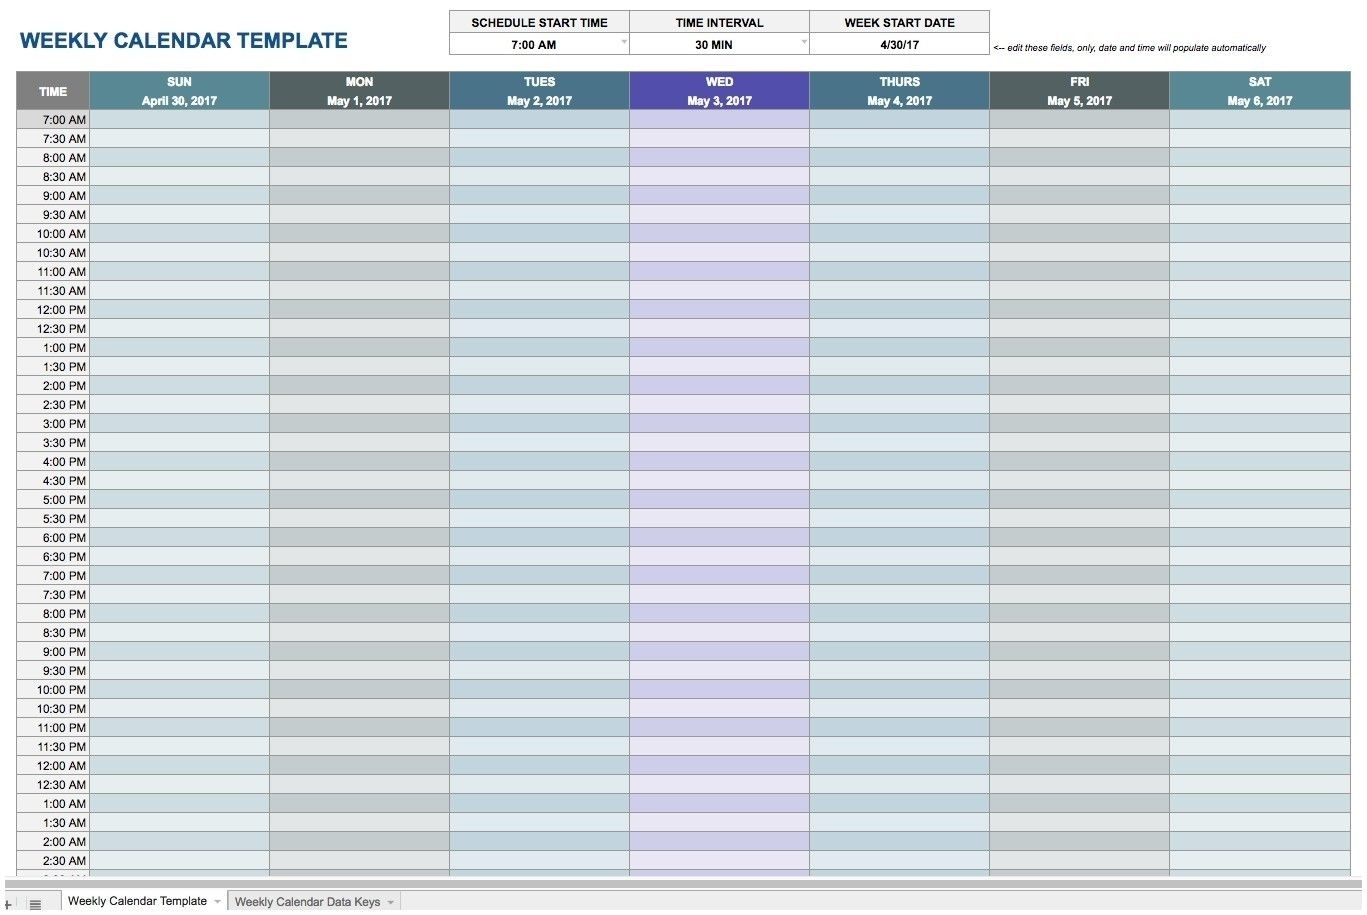 Daily Calendar Template Excel Appointment Schedule Template 15 with 30 Day Calendar Template Excel